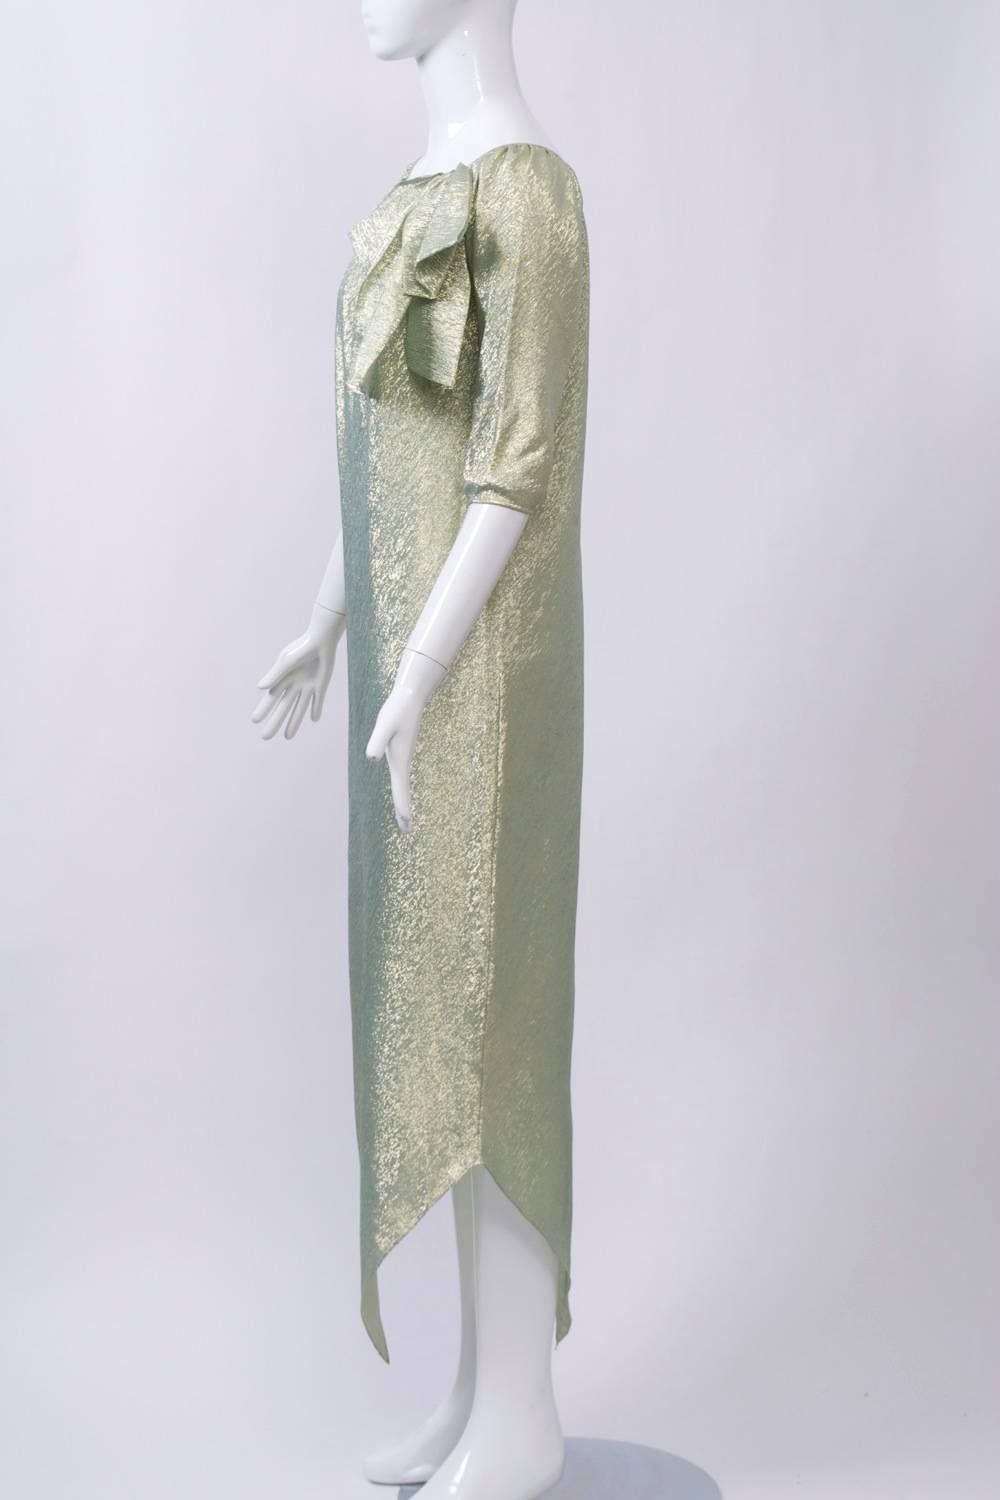 Easy wearing, long shift with handkerchief hem, 3/4 sleeves, and shirred scoop neck finished with a large bow. Fabricated of a lightweight synthetic in aqua and gold. No label, but attributed to Halston.
